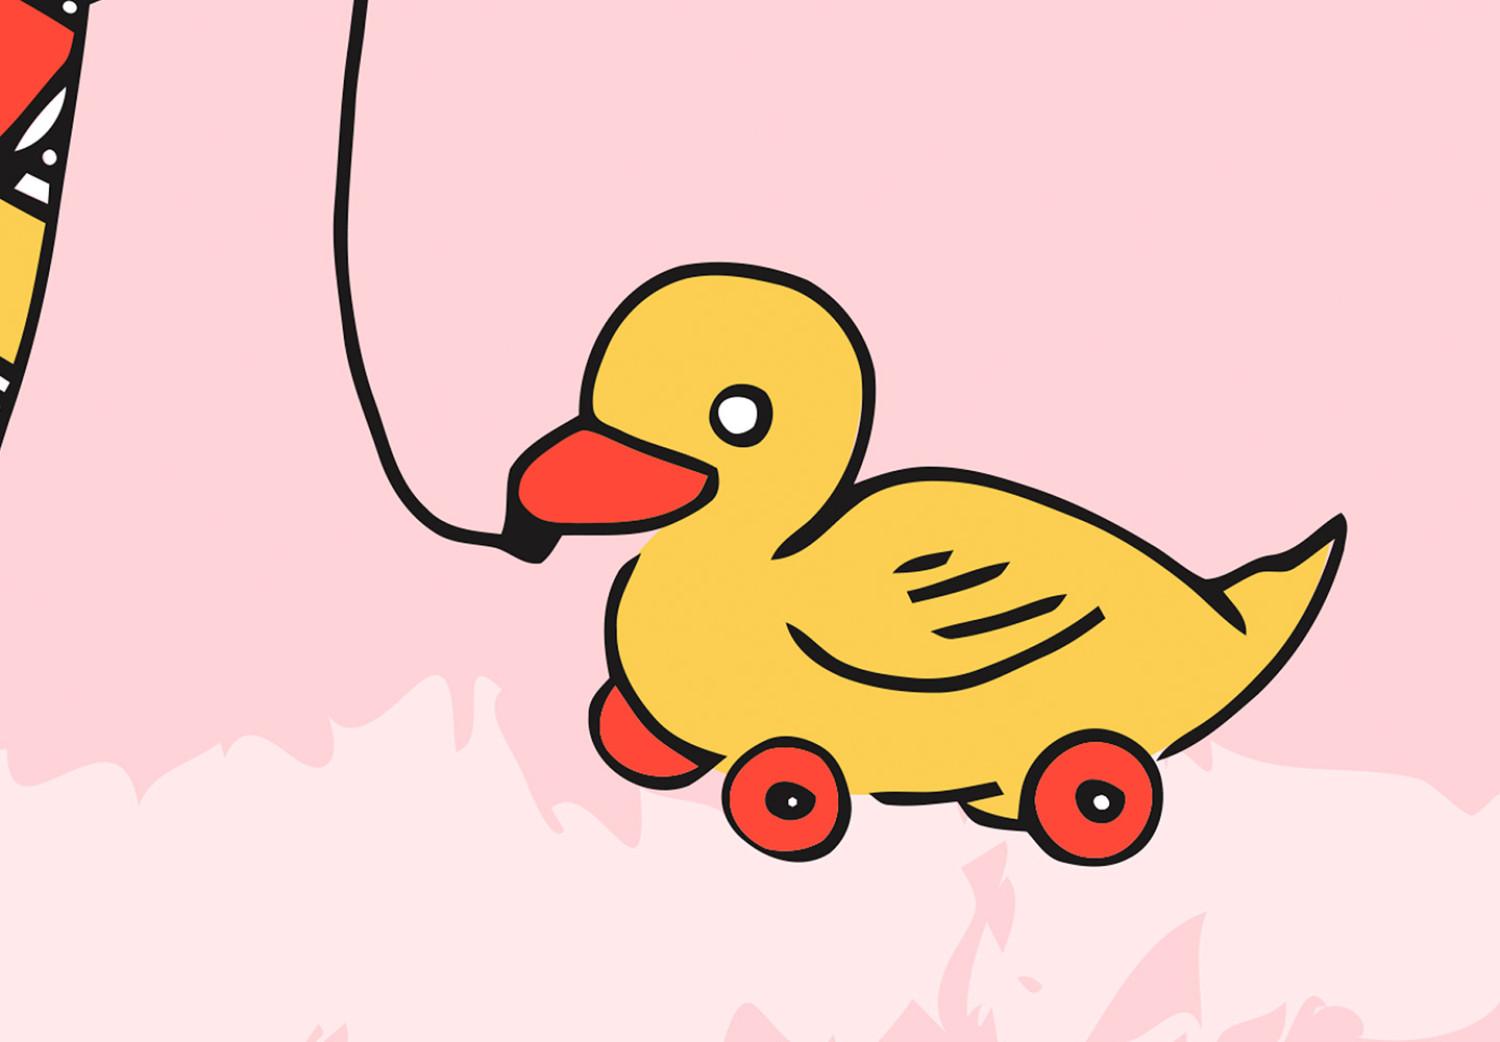 Poster Bunny's Friend - rabbit character holding a duckling on a pink background